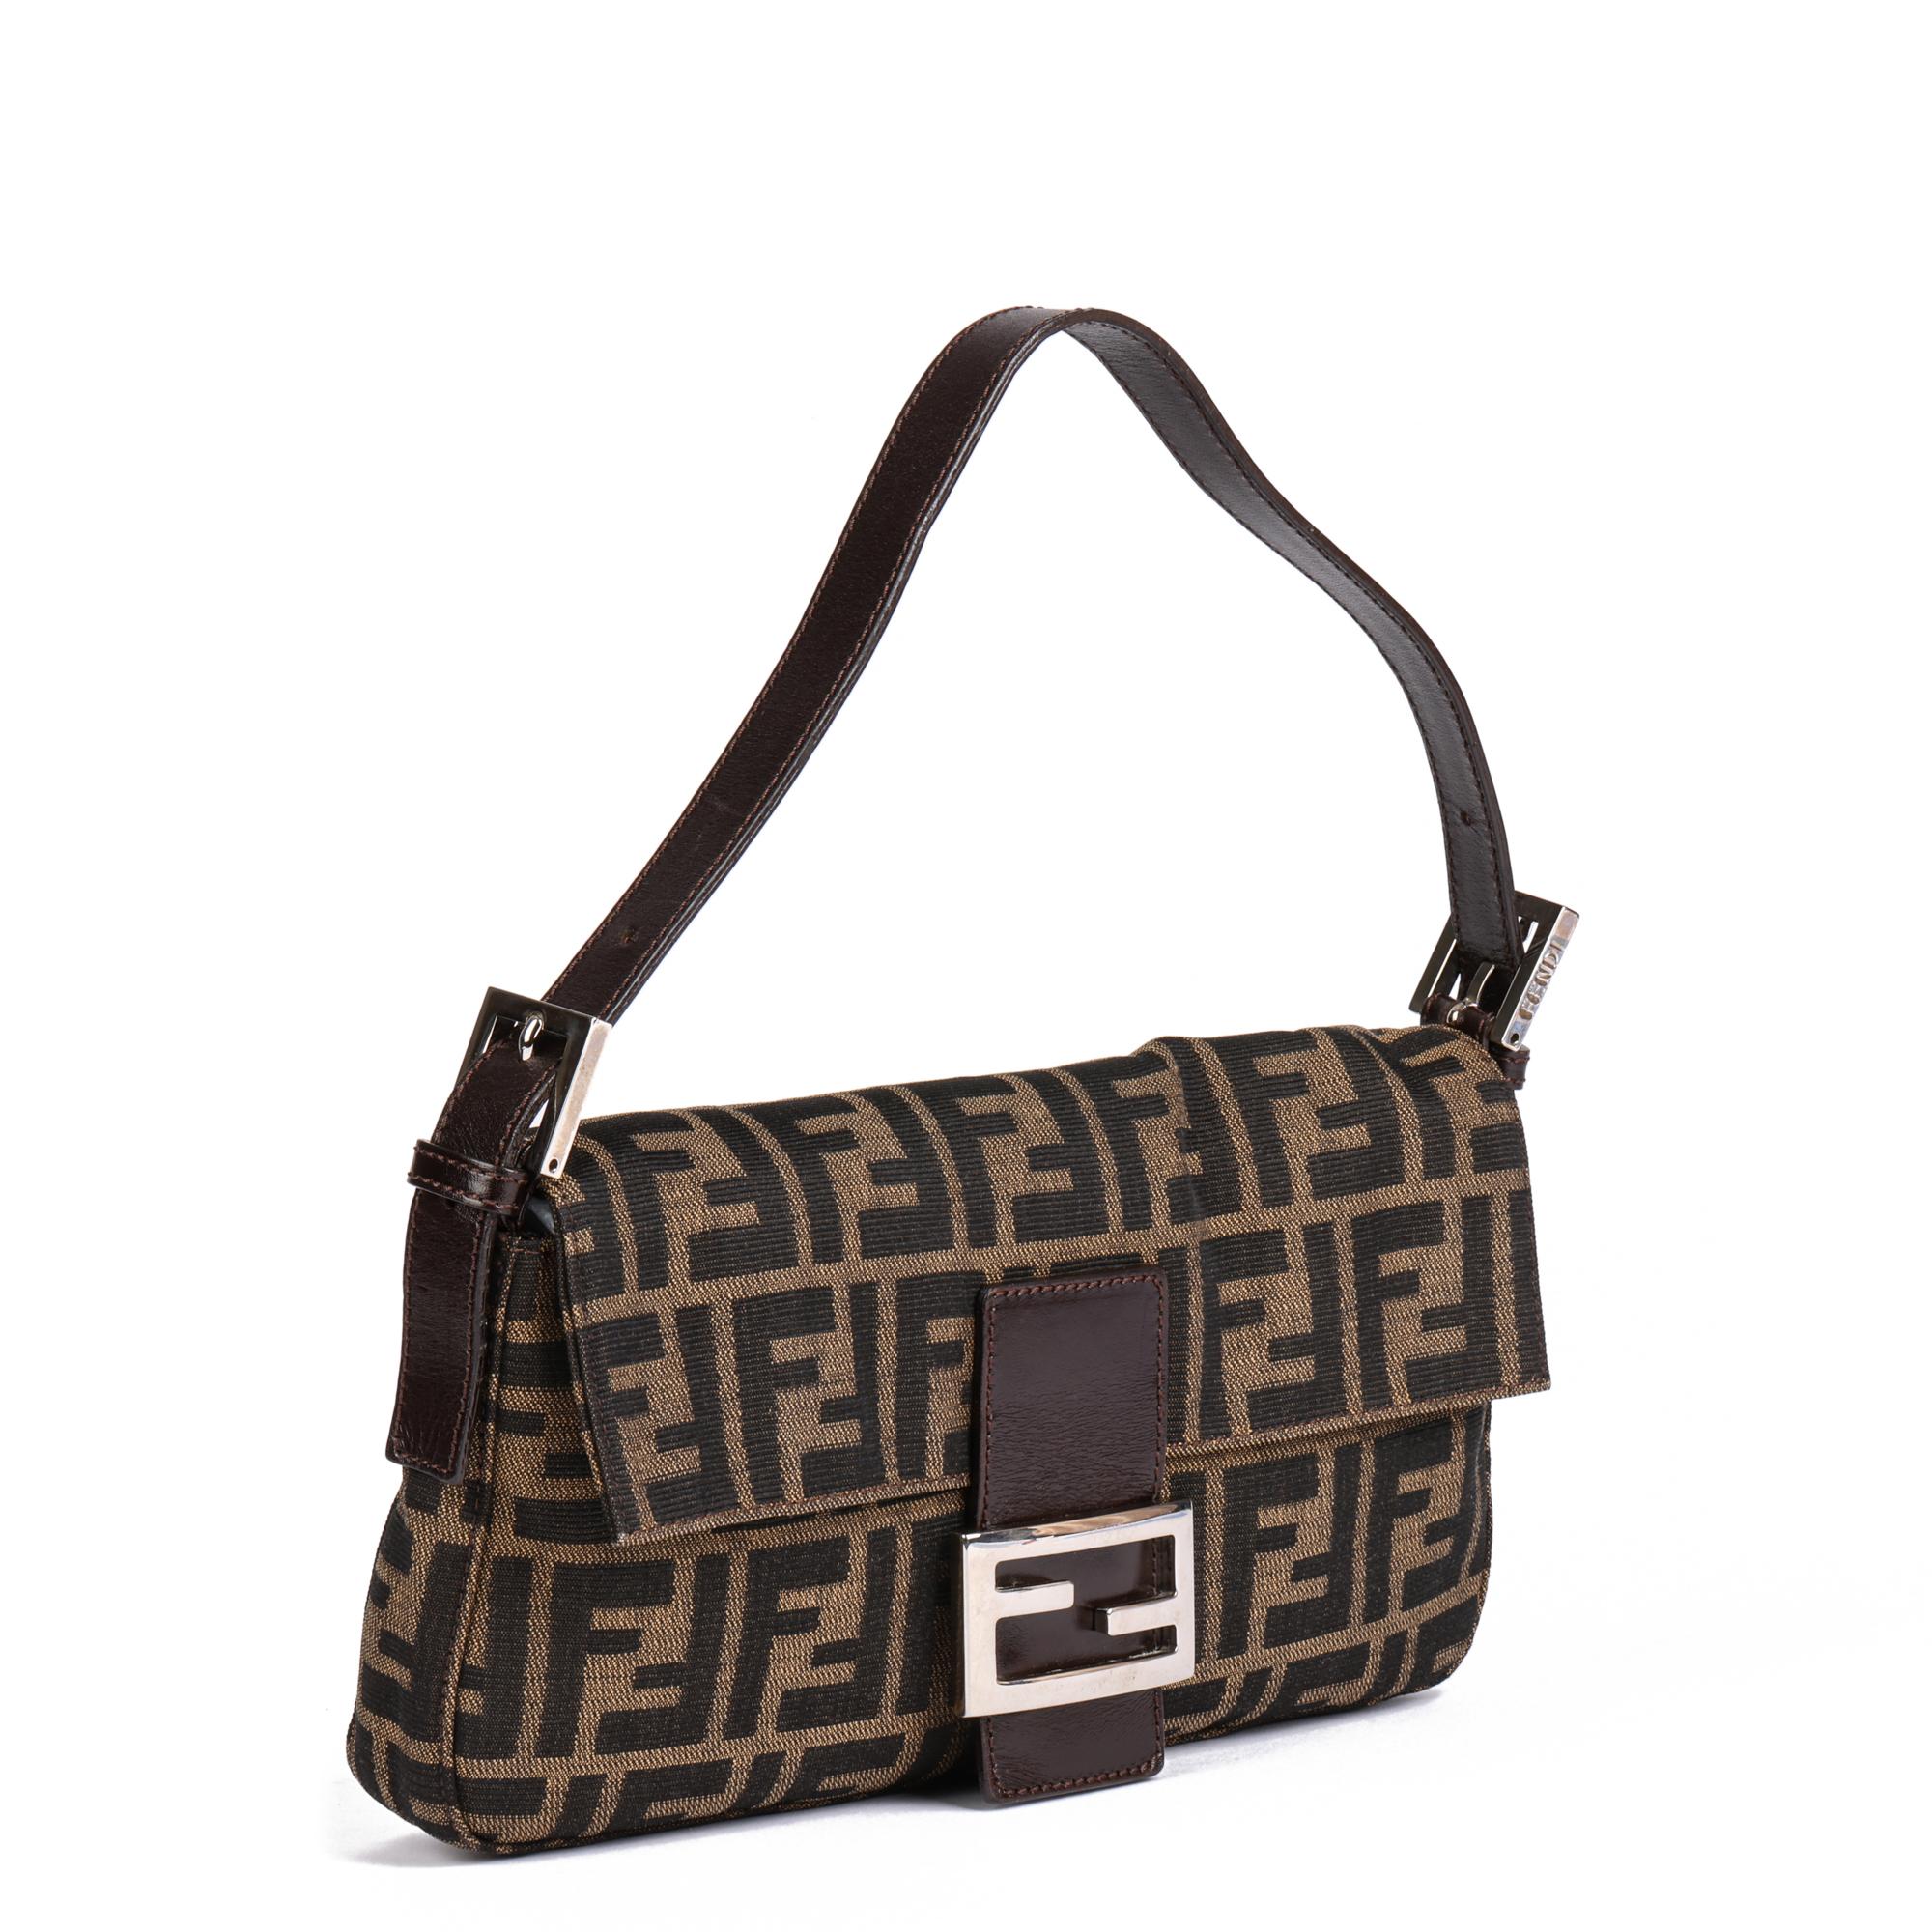 FENDI
Brown Zucca Canvas & Calfskin Leather Vintage Baguette

Xupes Reference: HB4662
Serial Number: Unreadable
Age (Circa): 2000
Authenticity Details: Serial Stamp (Made in Italy)
Gender: Ladies
Type: Shoulder

Colour: Brown
Hardware: